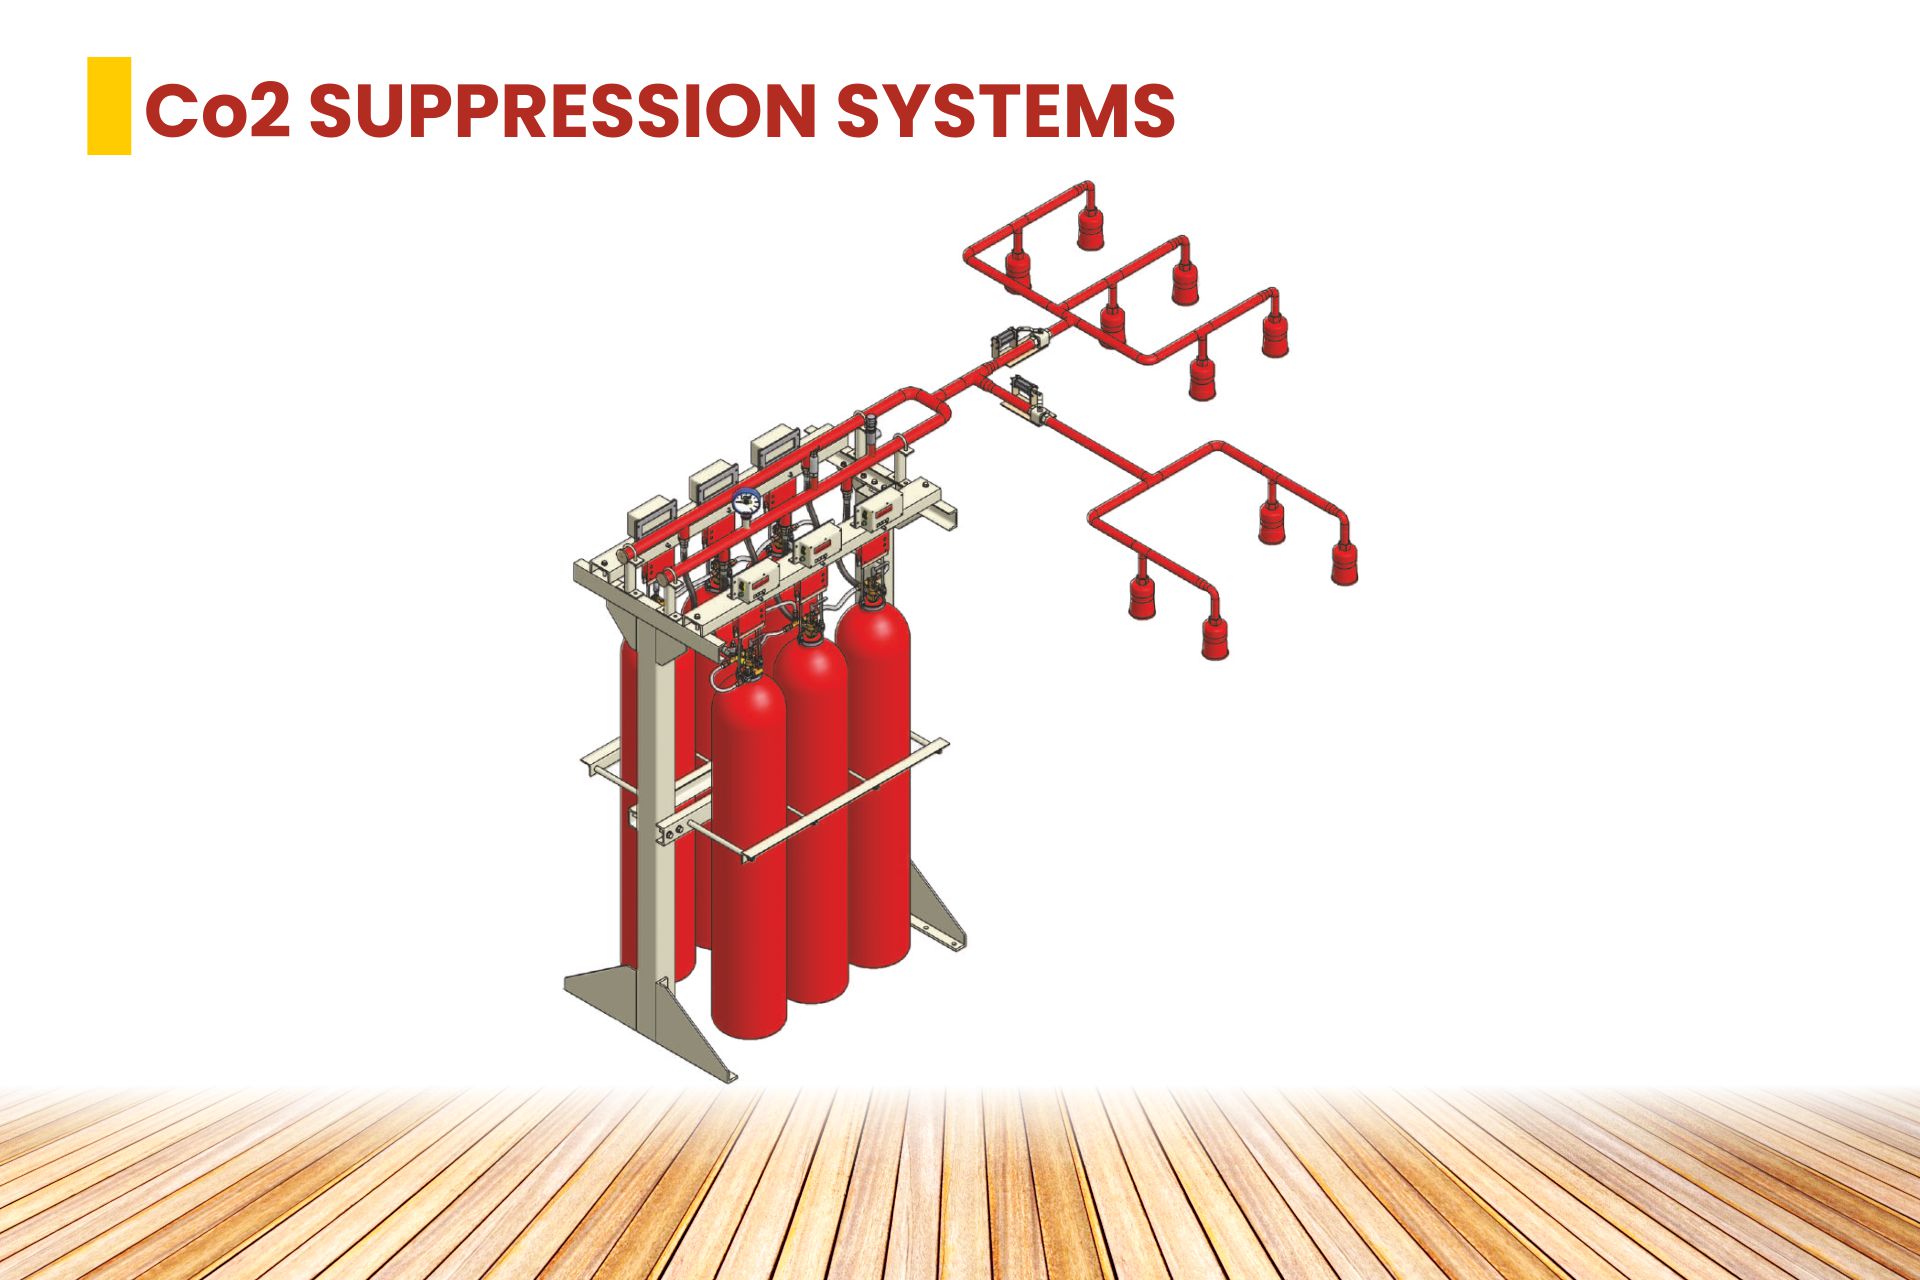 Co2 SUPPRESSION SYSTEM Product